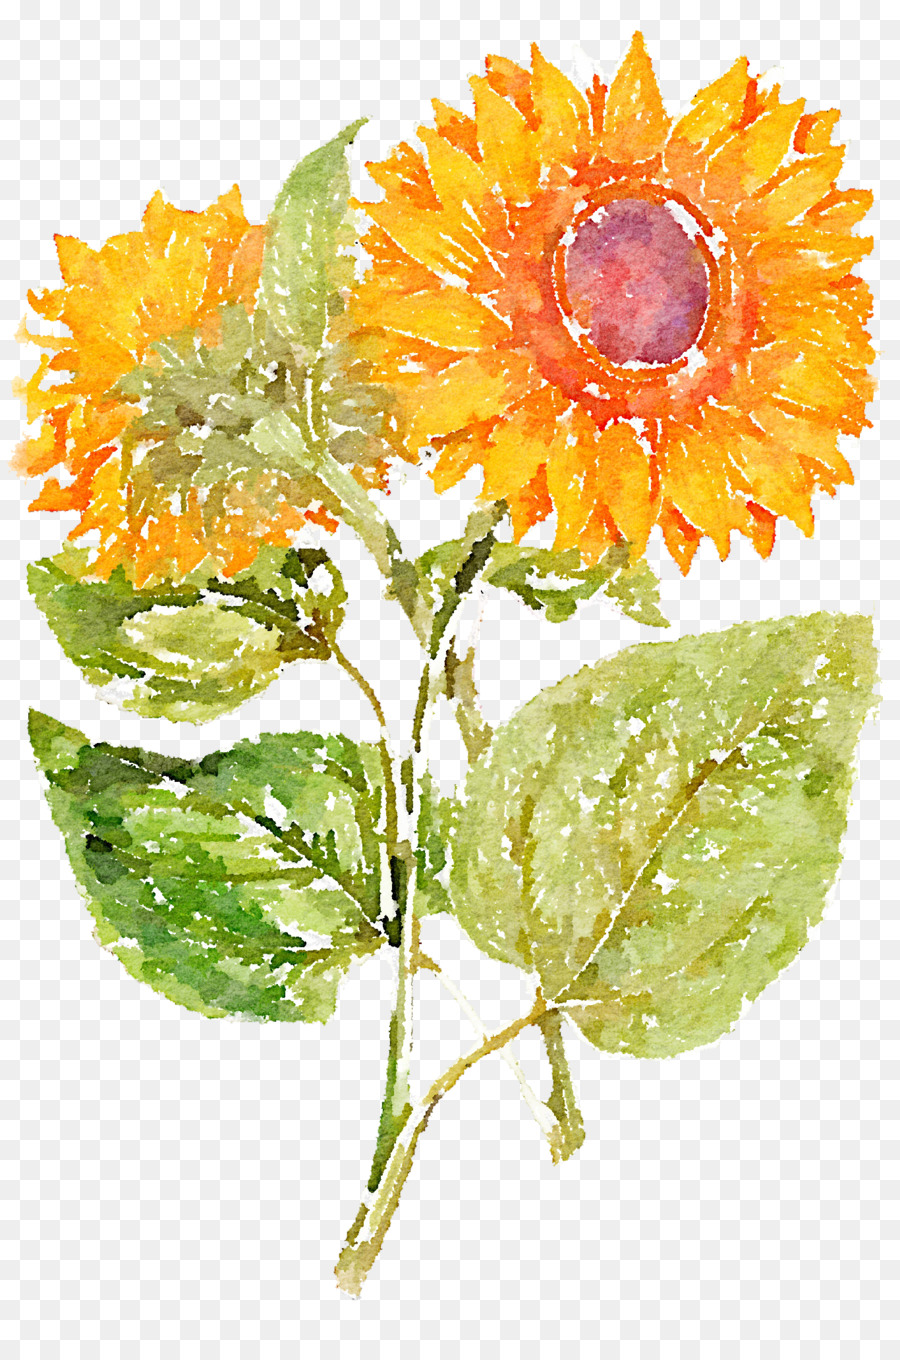 Common sunflower - Hand painted sunflowers png download - 1366*2048 - Free Transparent Common Sunflower png Download.